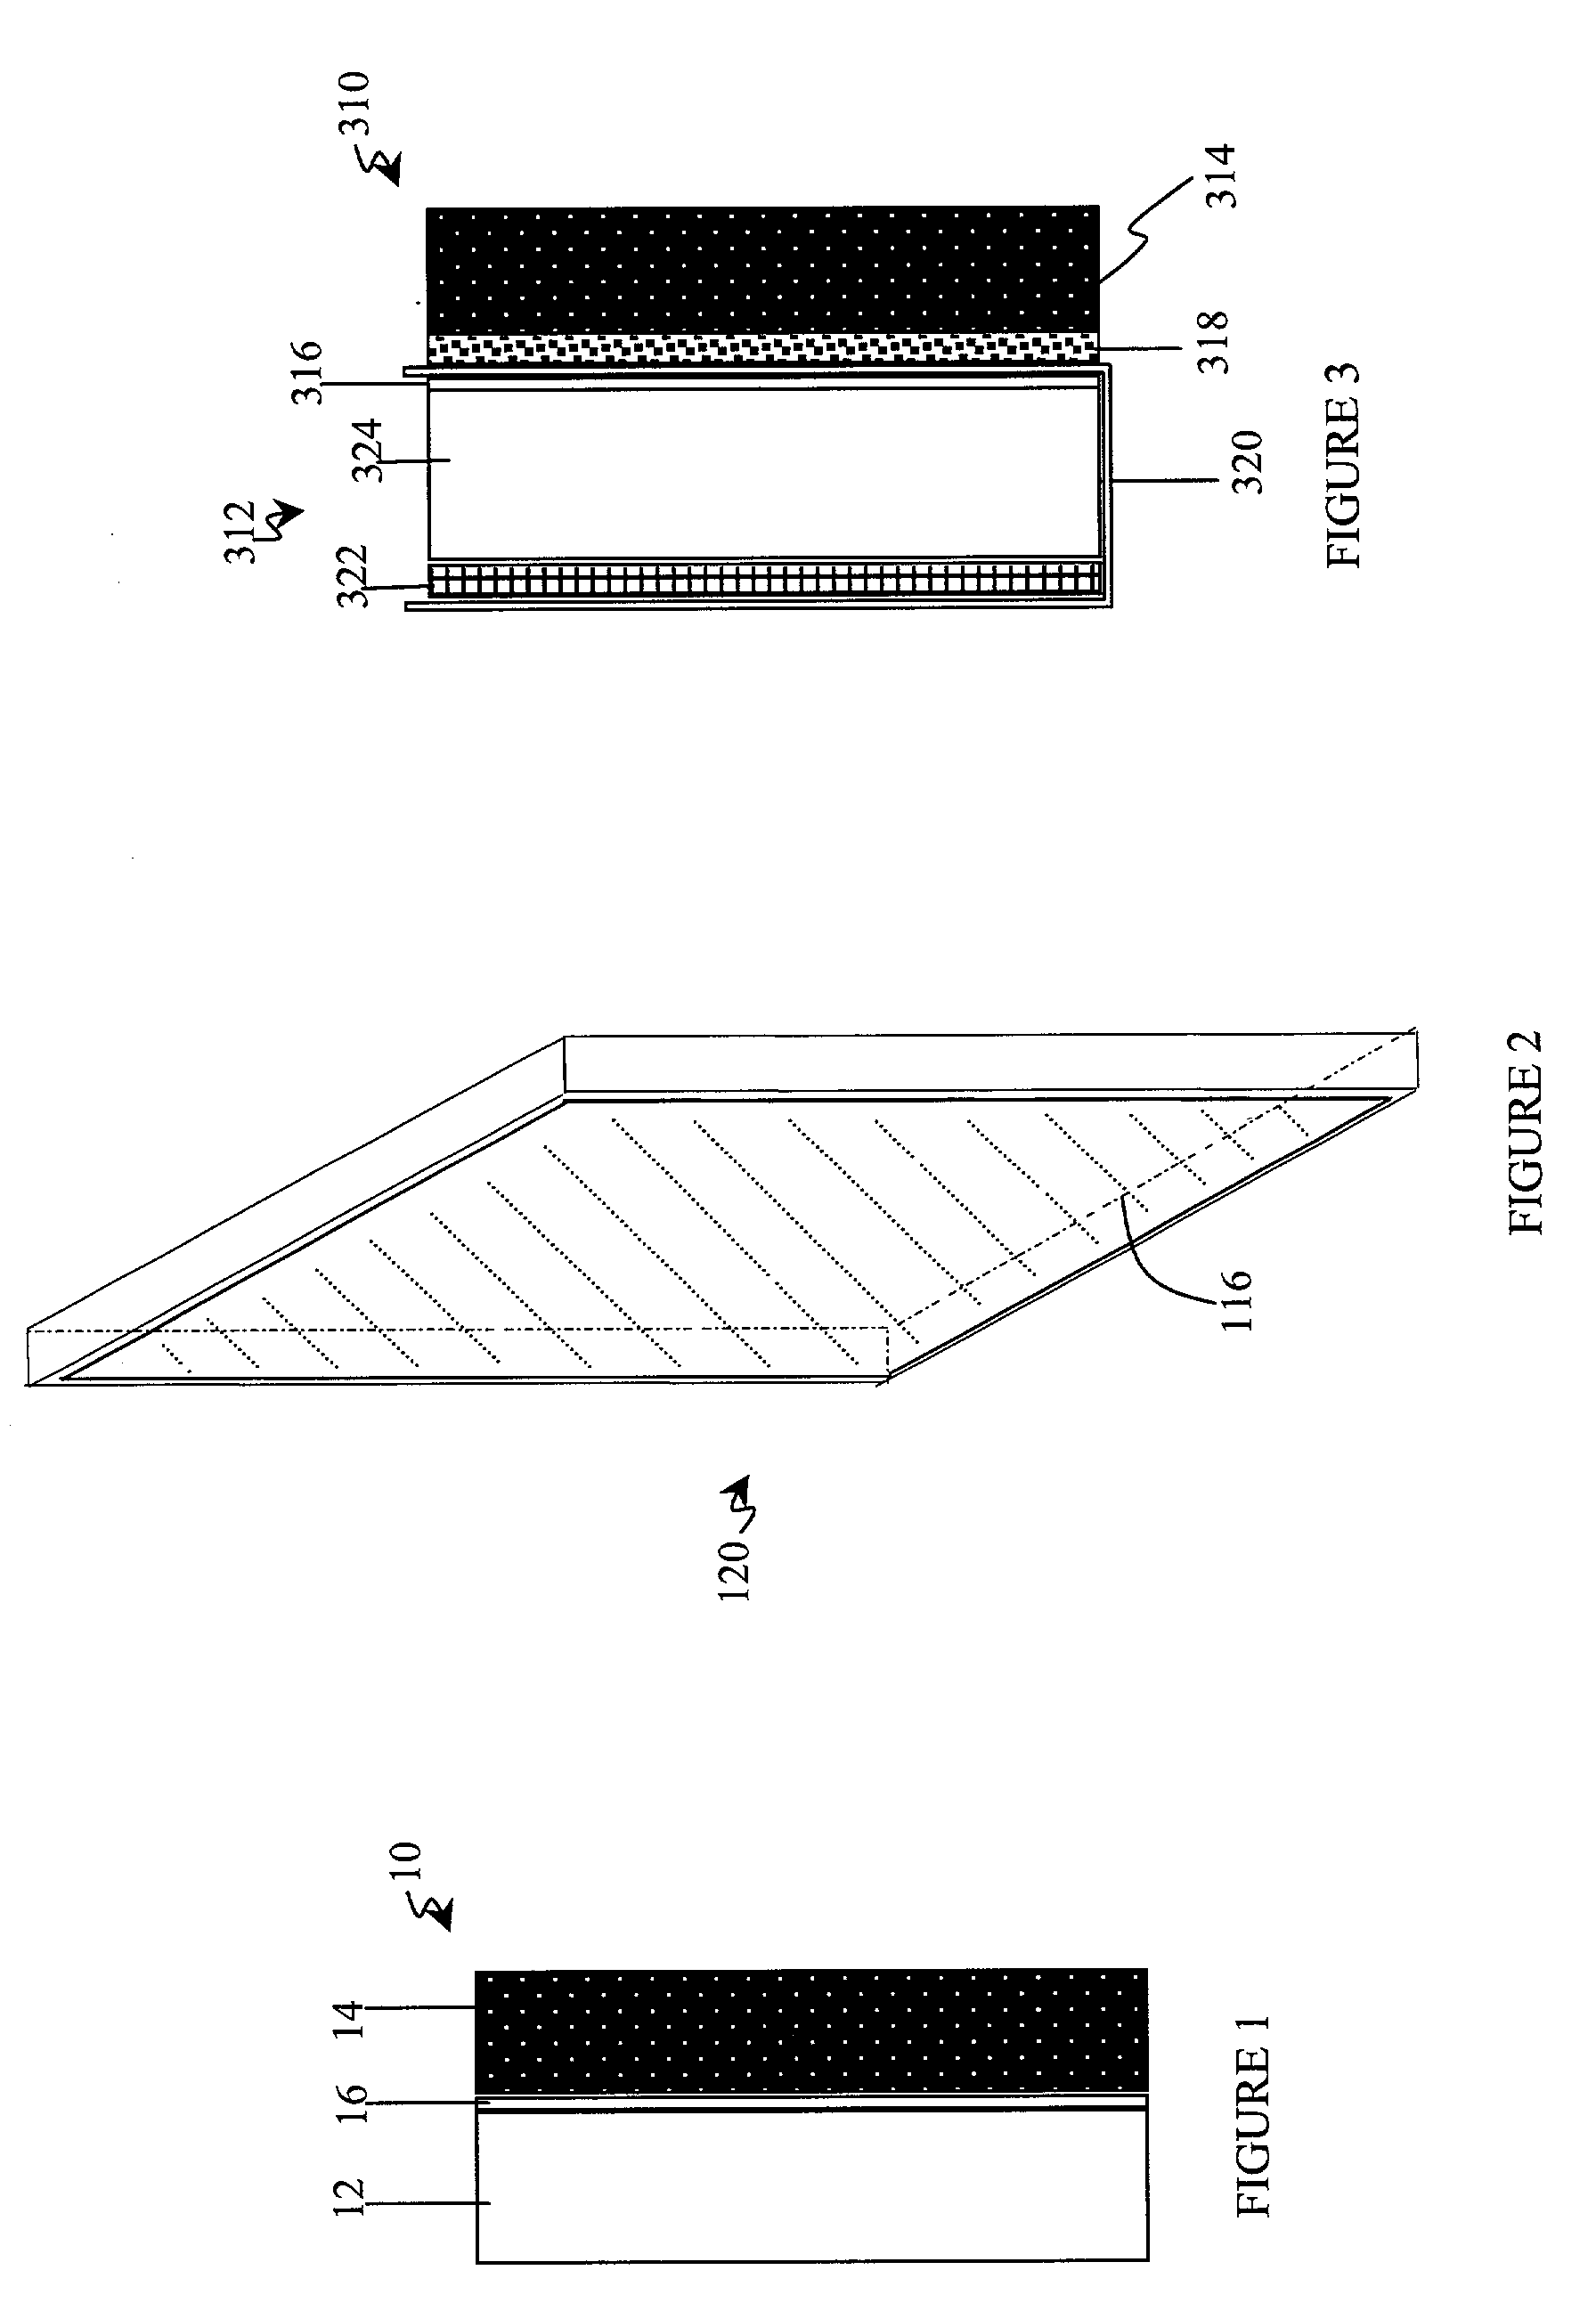 Refuelable metal air electrochemical cell and refuelabel anode structure for electrochemical cells